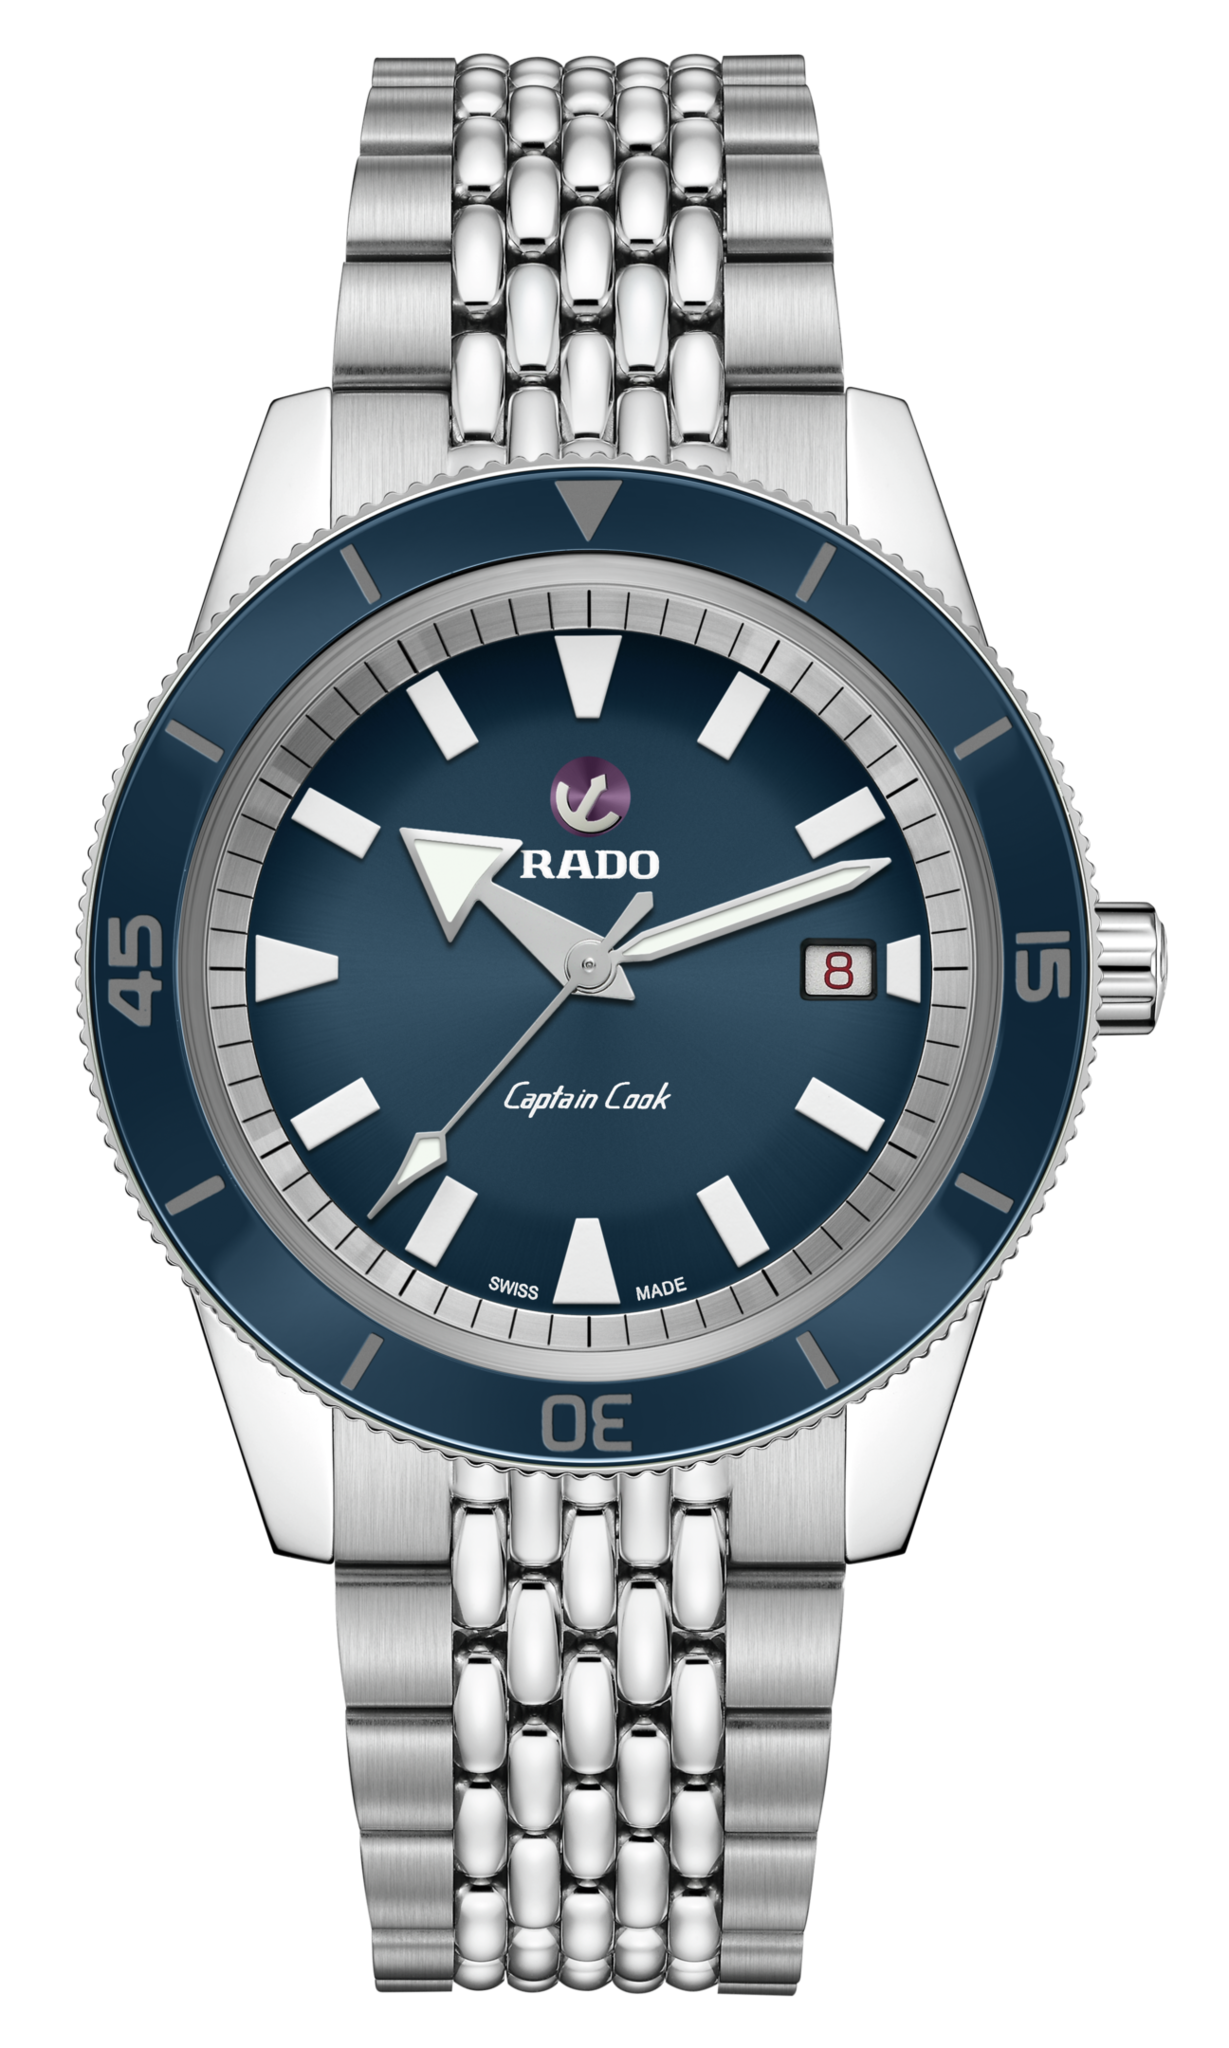 Captain of Industry: Rado Raises the Bar With the New Captain Cook  High-Tech Ceramic Watches - Revolution Watch